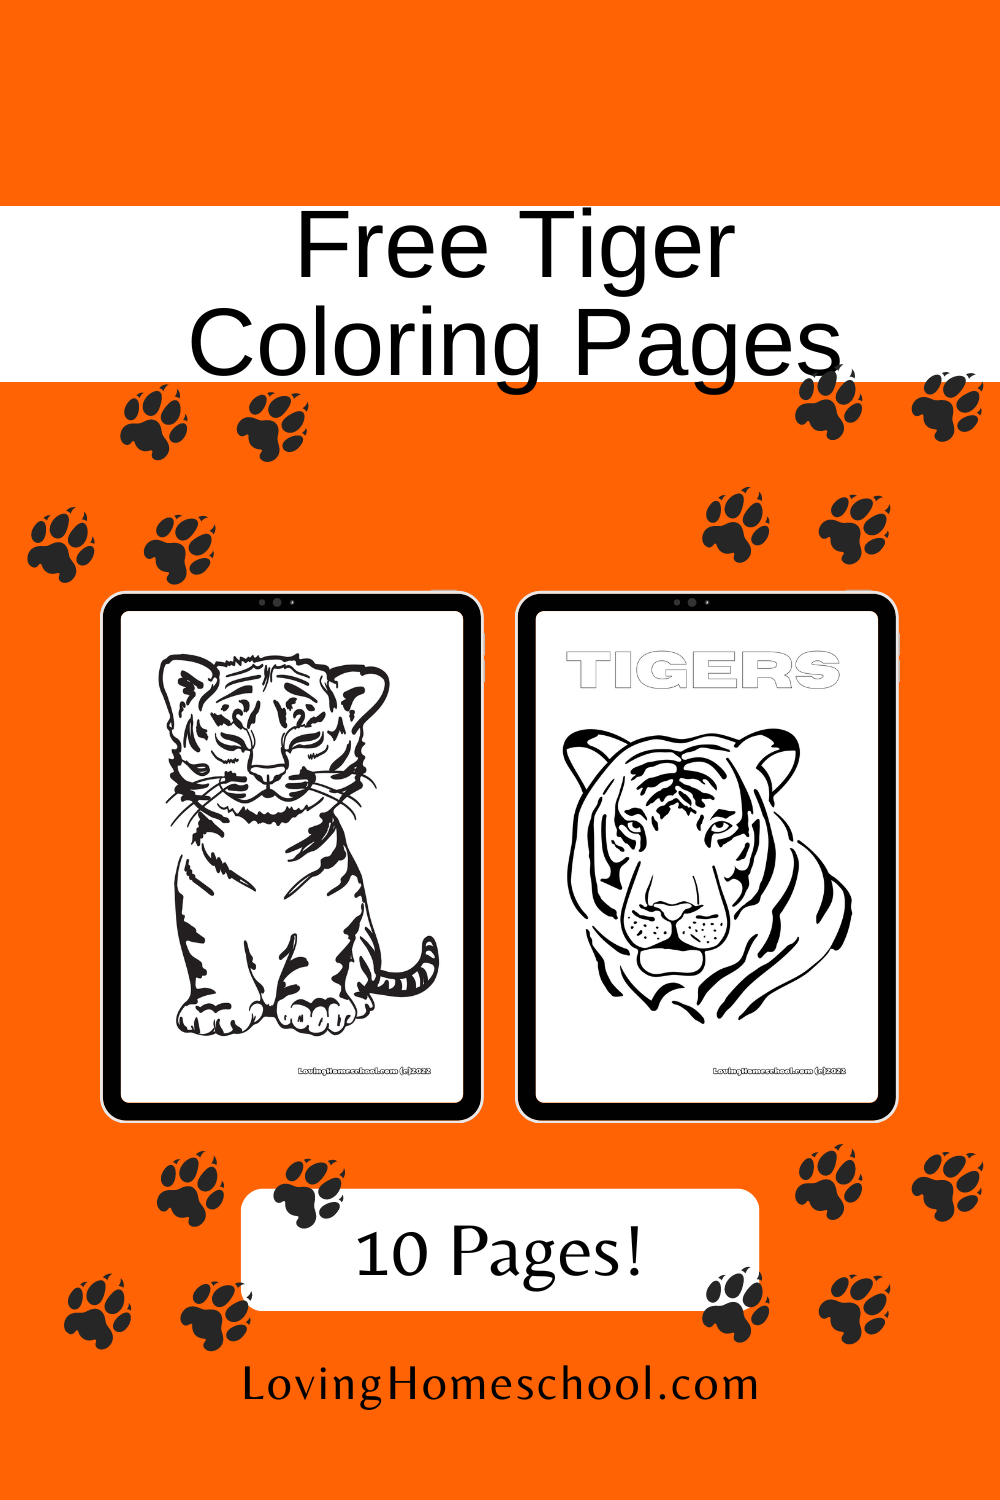 Free Tiger Coloring Pages Pinterest Pin